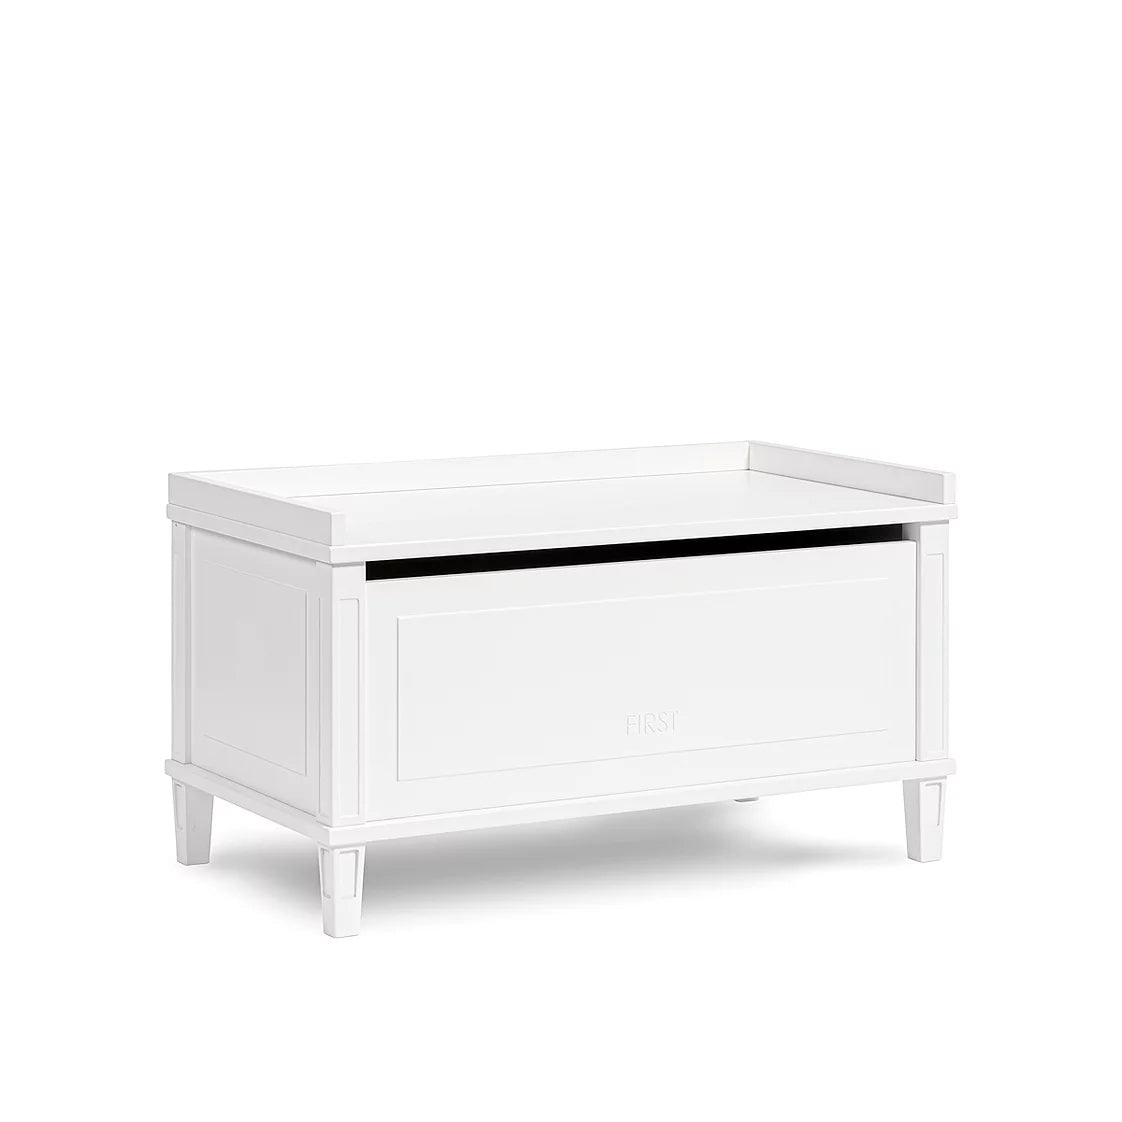 First Furniture Solid Gio' Toy Box